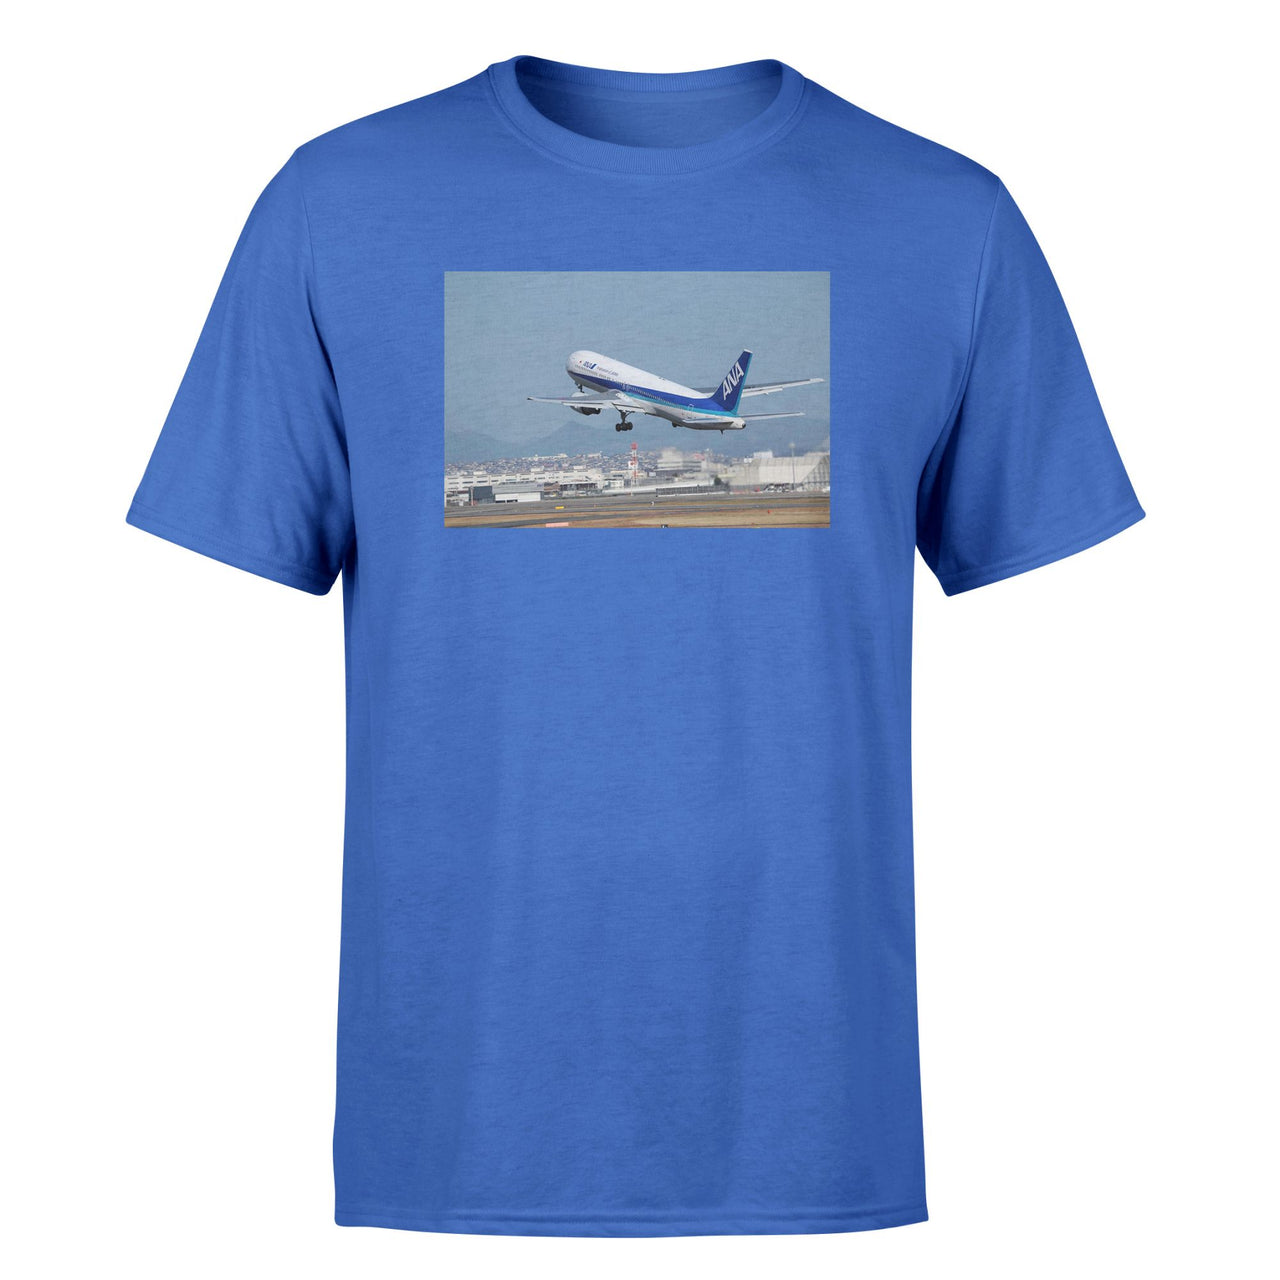 Departing ANA's Boeing 767 Designed T-Shirts